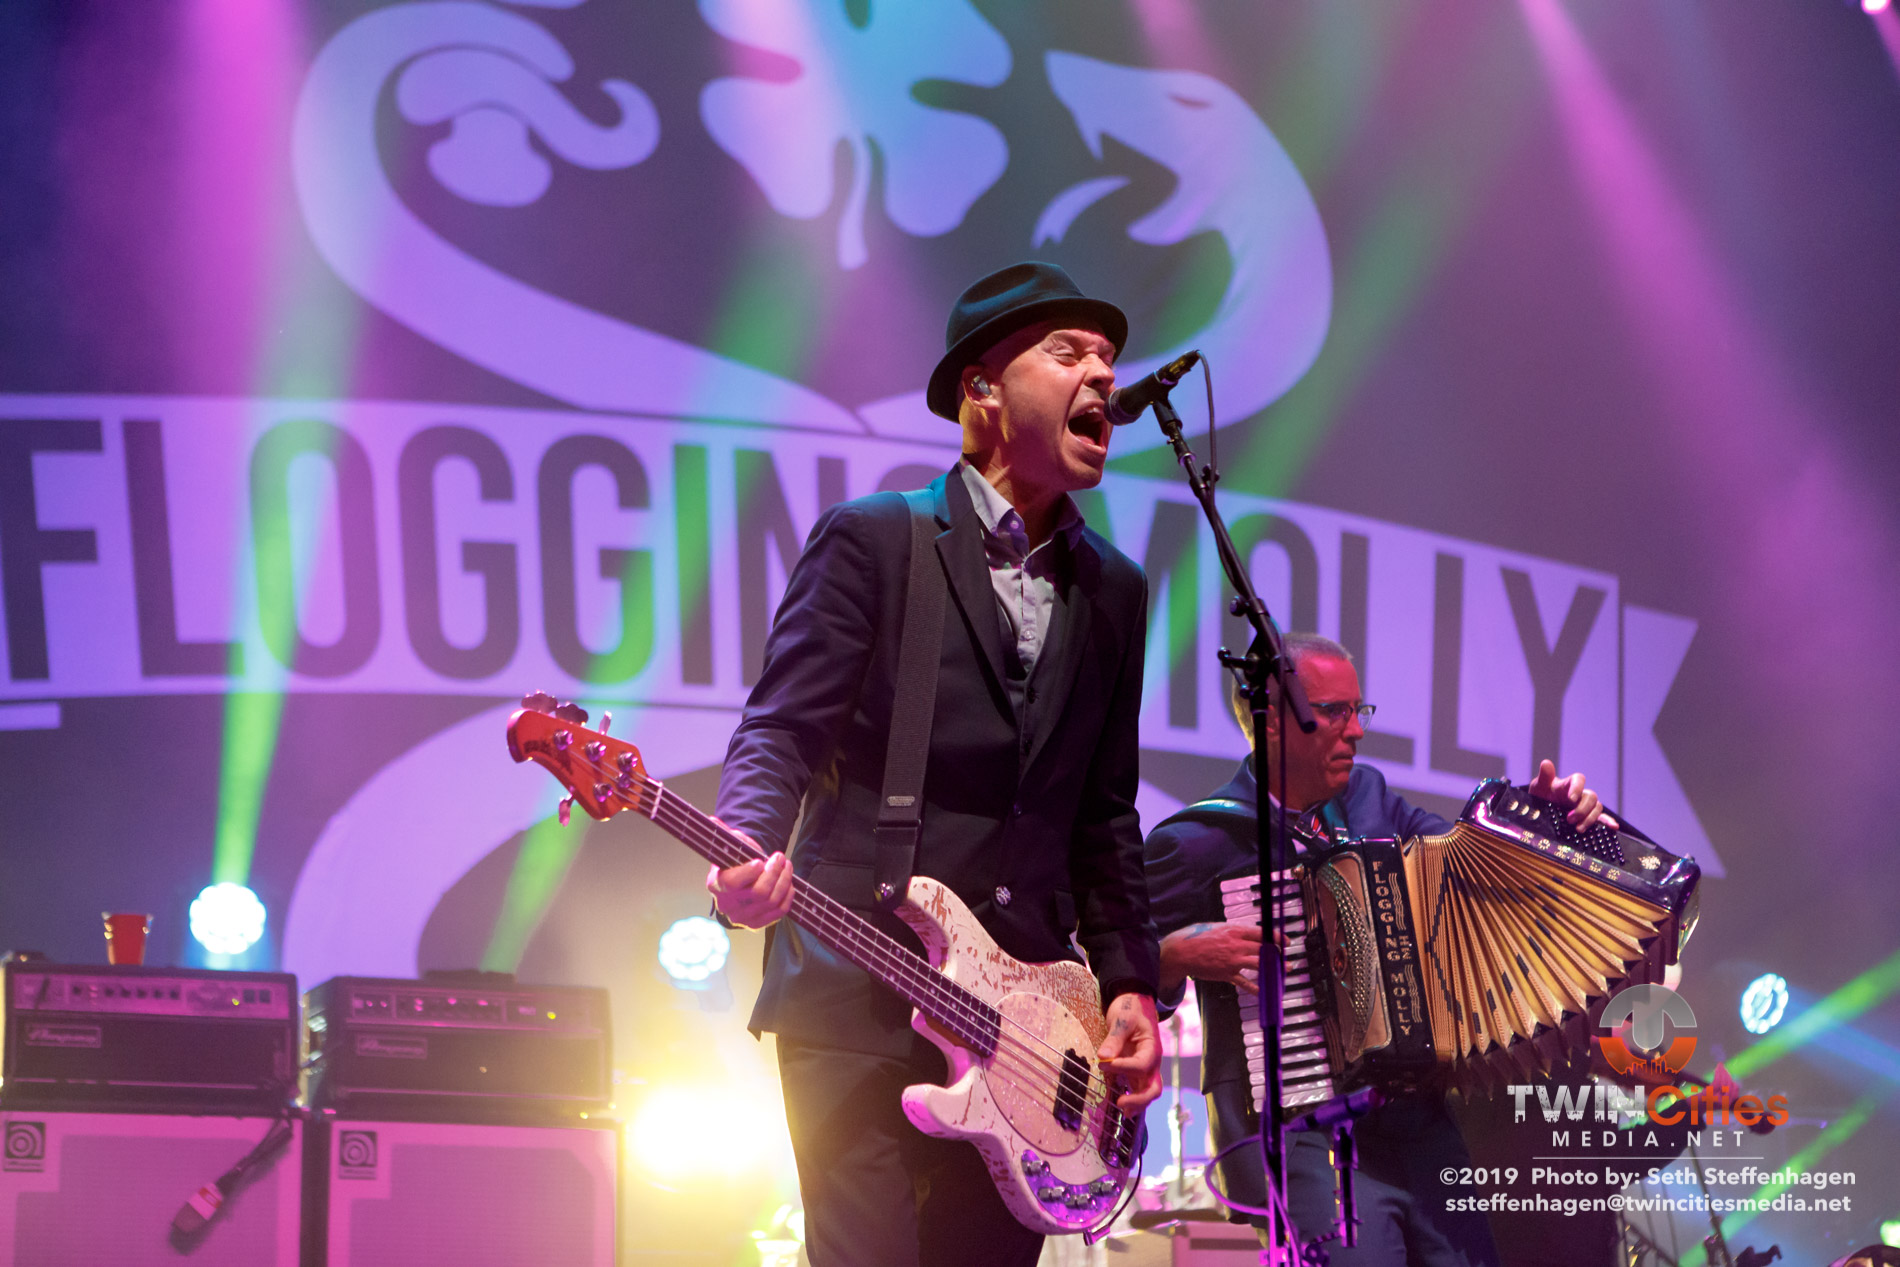 September 8, 2019 - Minneapolis, Minnesota, United States - Flogging Molly live in concert at the The Armory. Co-headlining with Social Distortion along with The Devil Makes Three and Le Butcherettes as the openers.

(Photo by Seth Steffenhagen/Steffenhagen Photography)